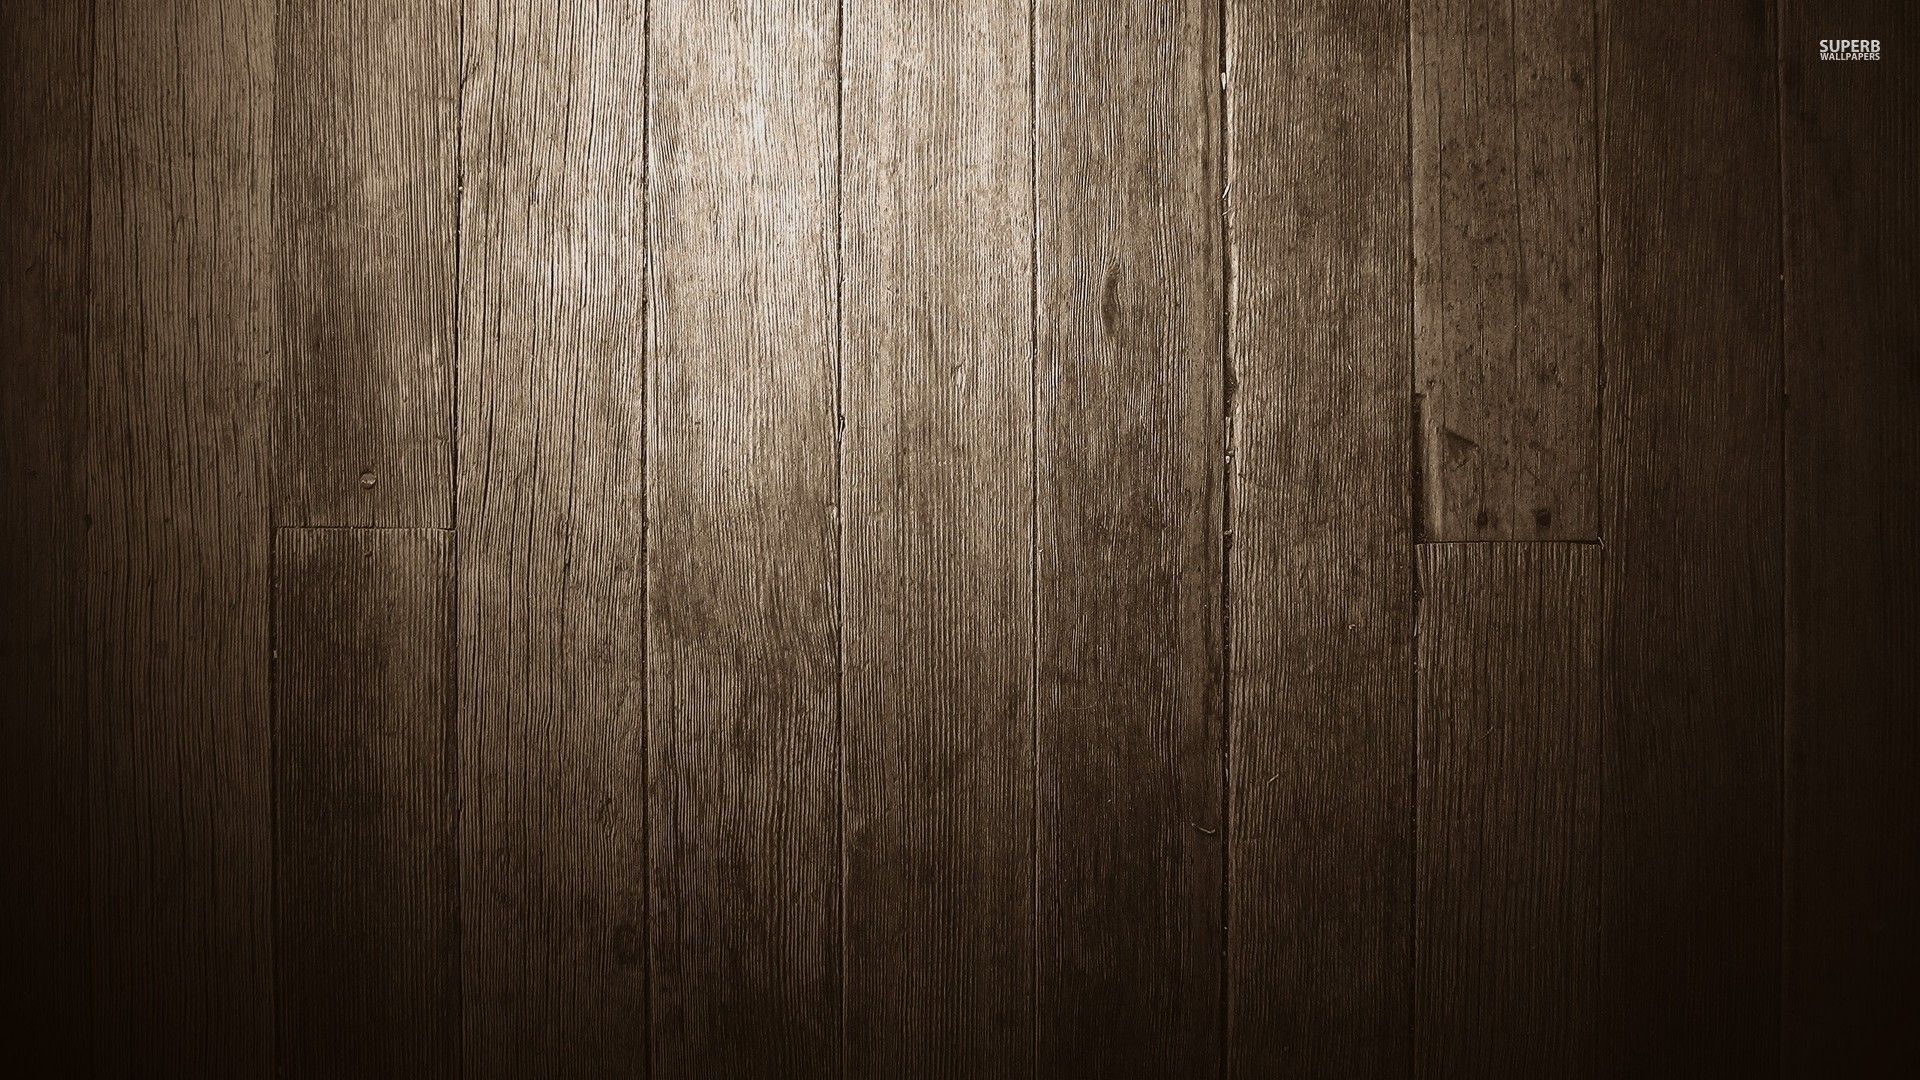 Wood panels wallpaper - Photography wallpapers - #26745